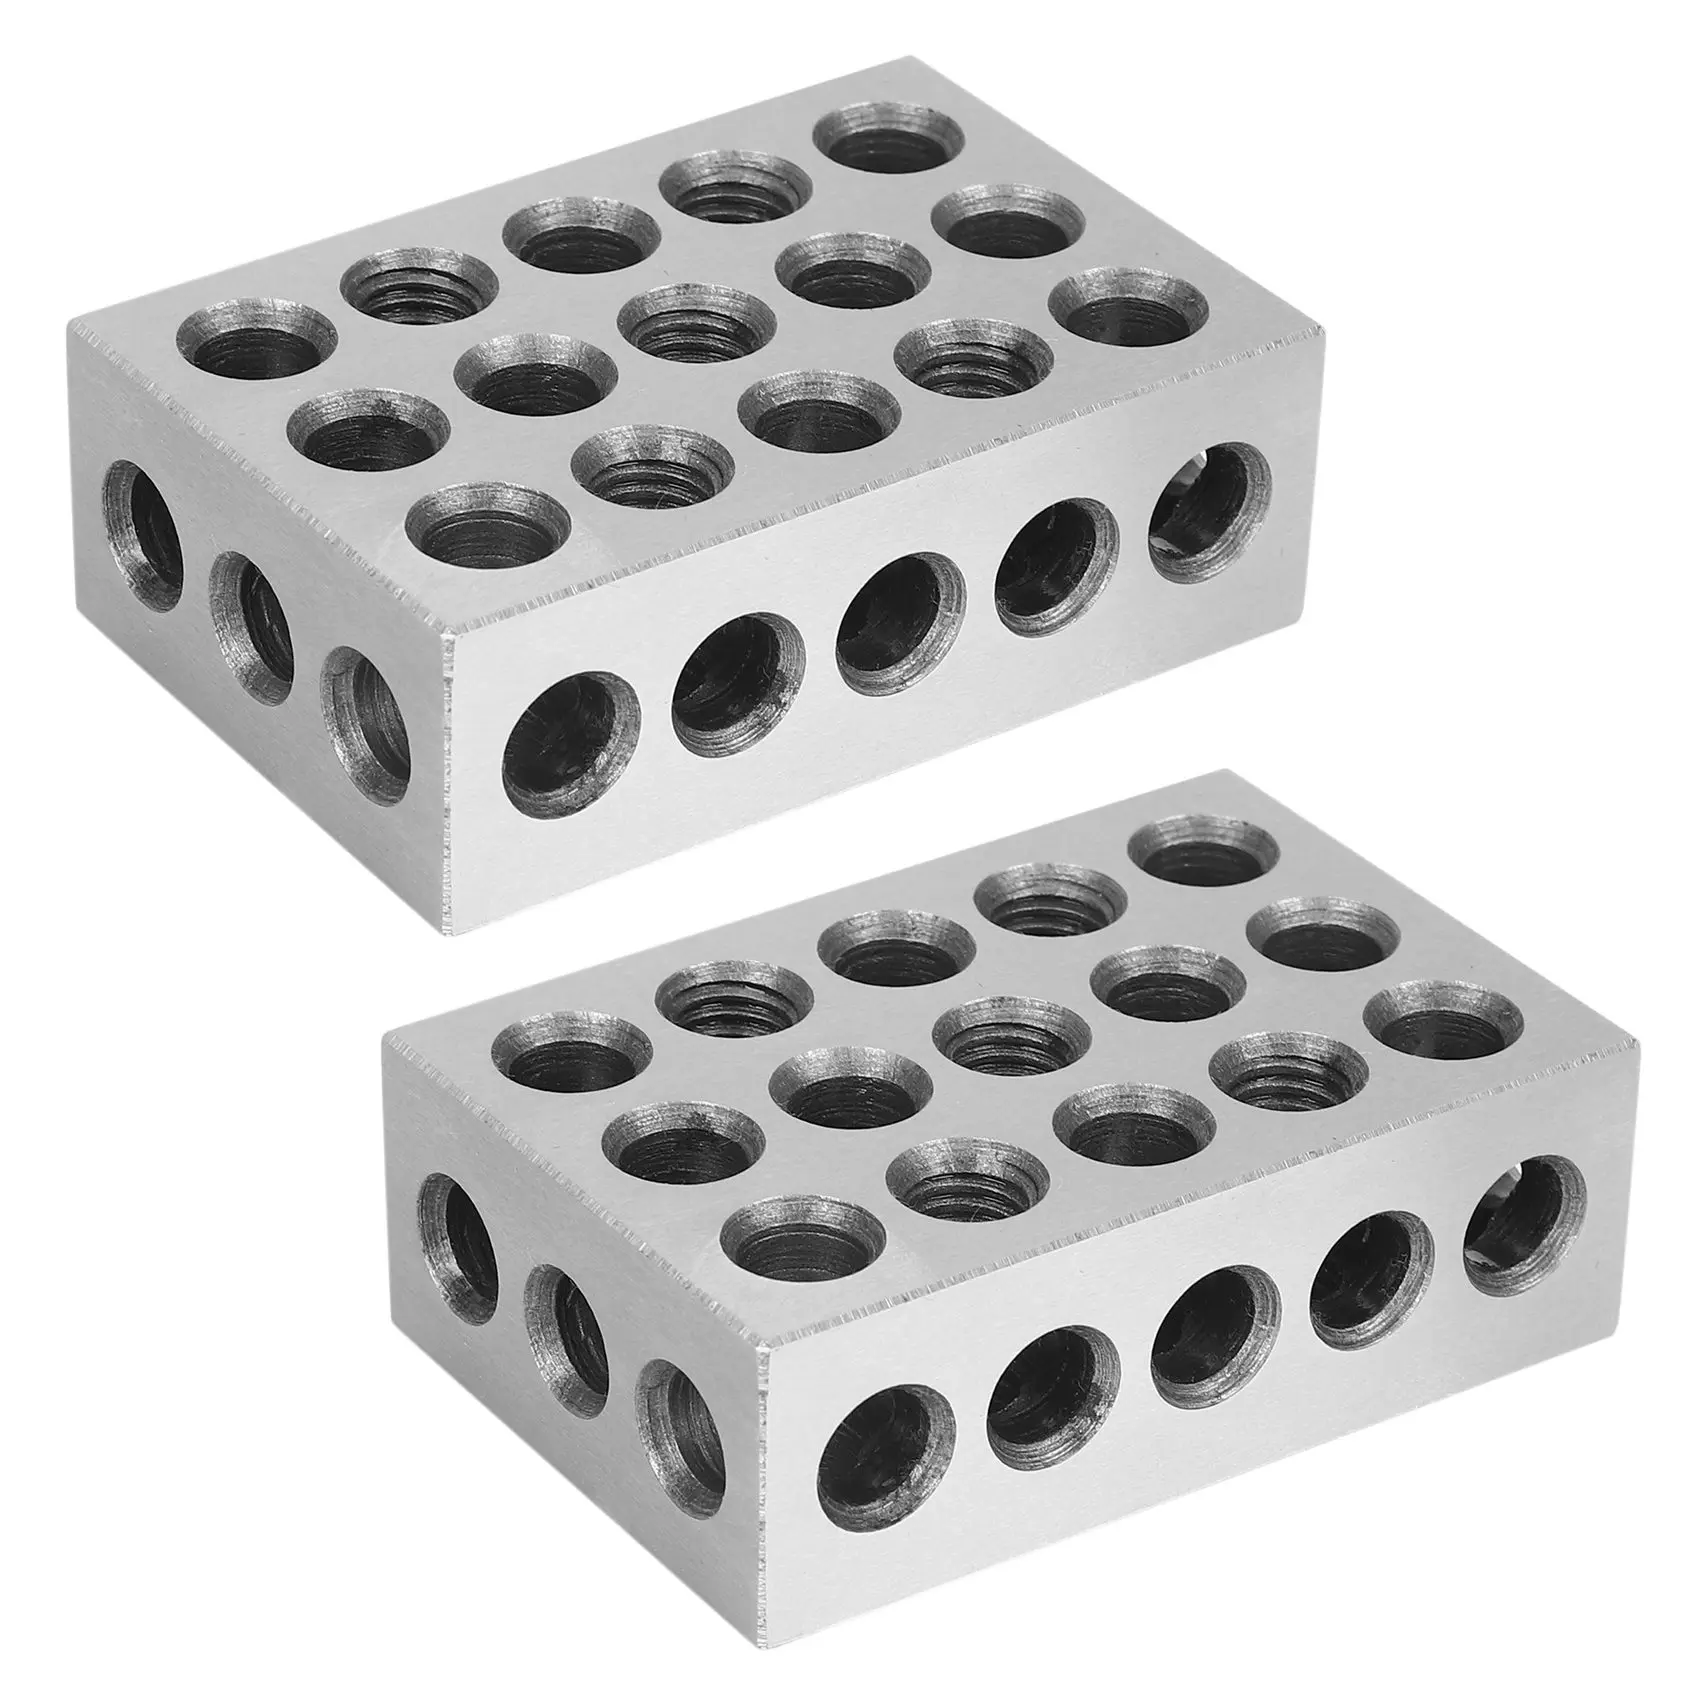 

4Pcs 25X50X75mm Hardened Steel Blocks 23 Holes Parallel Clamping Block Lathe Tools Precision 0.005mm for Machine Tool